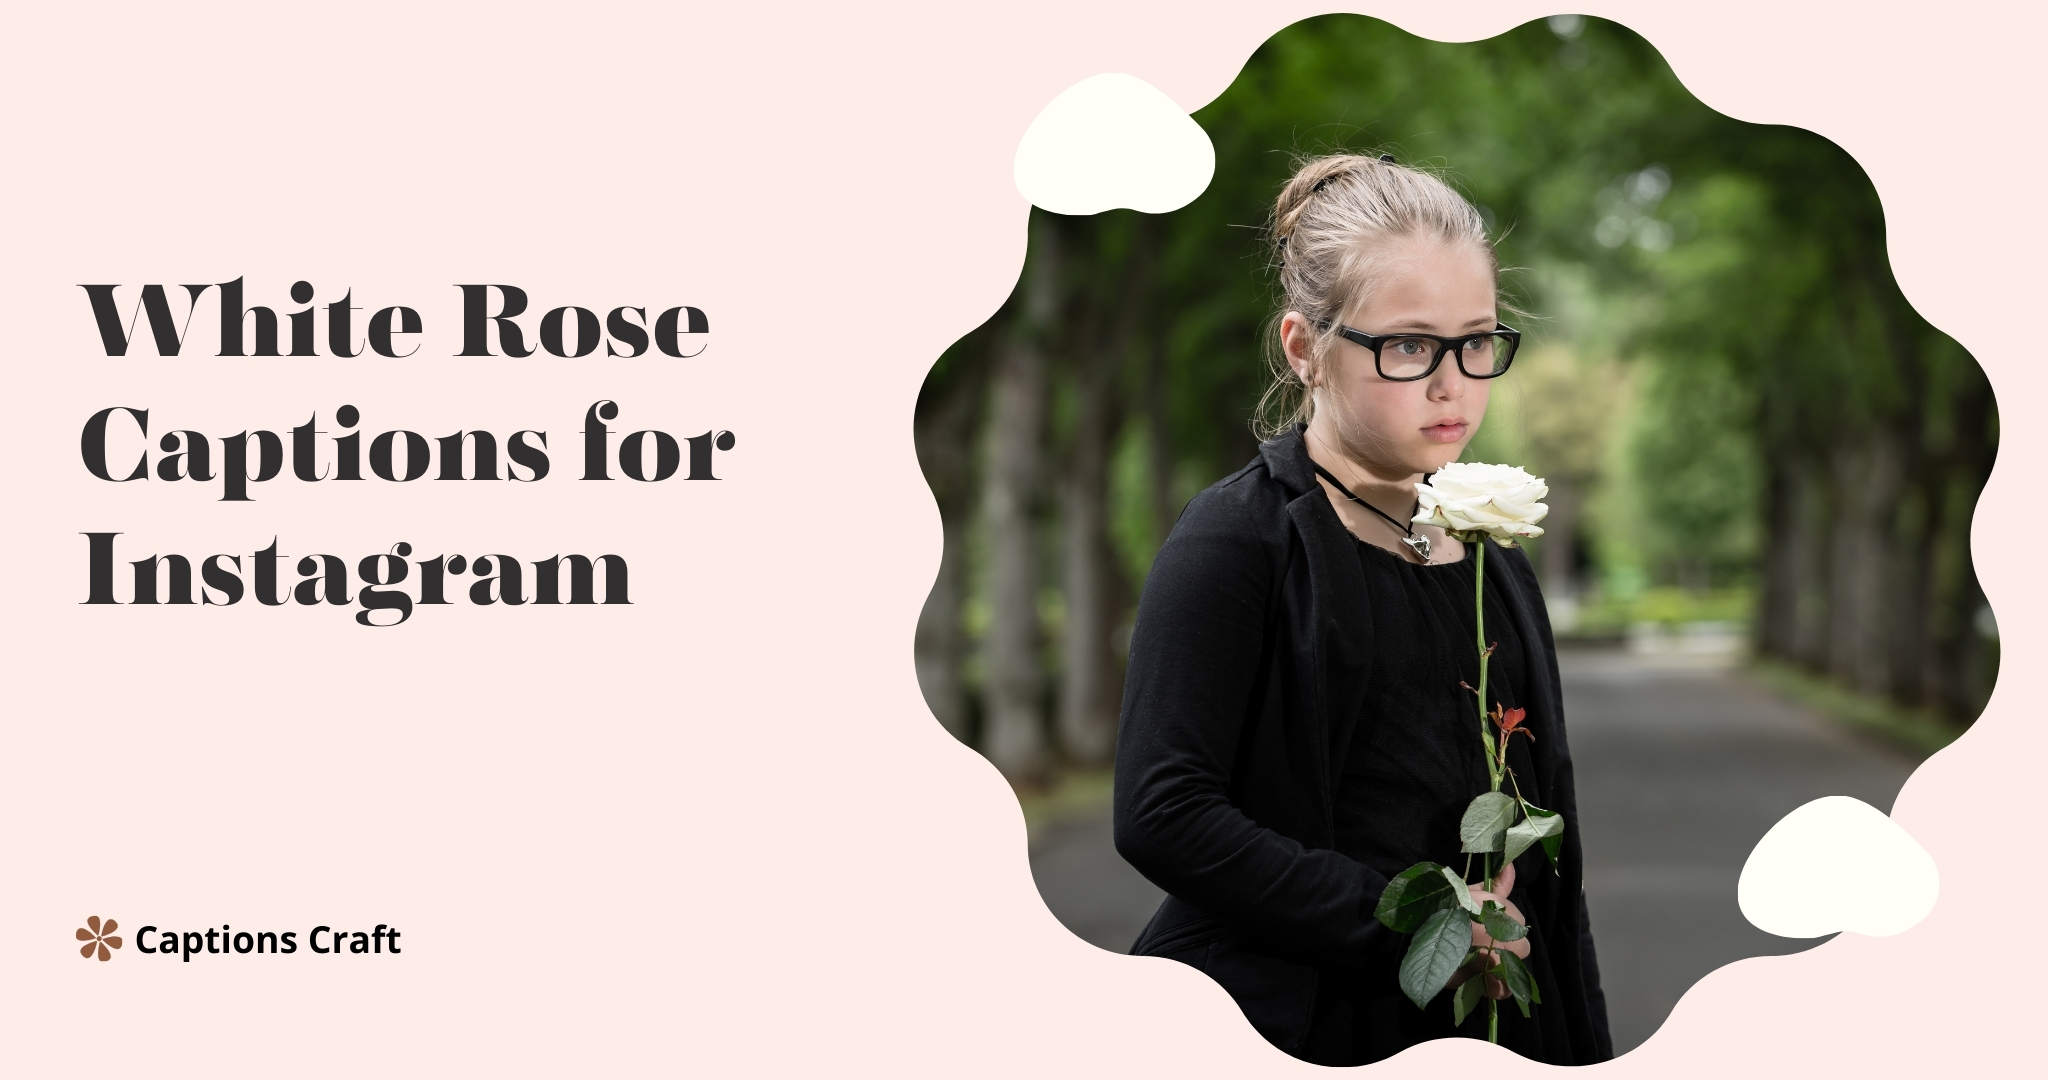 A beautiful white rose accompanied by an Instagram caption that will mesmerize your followers. Symbolizing purity and sophistication. Enhance your feed with this #WhiteRose #InstagramCaptions.